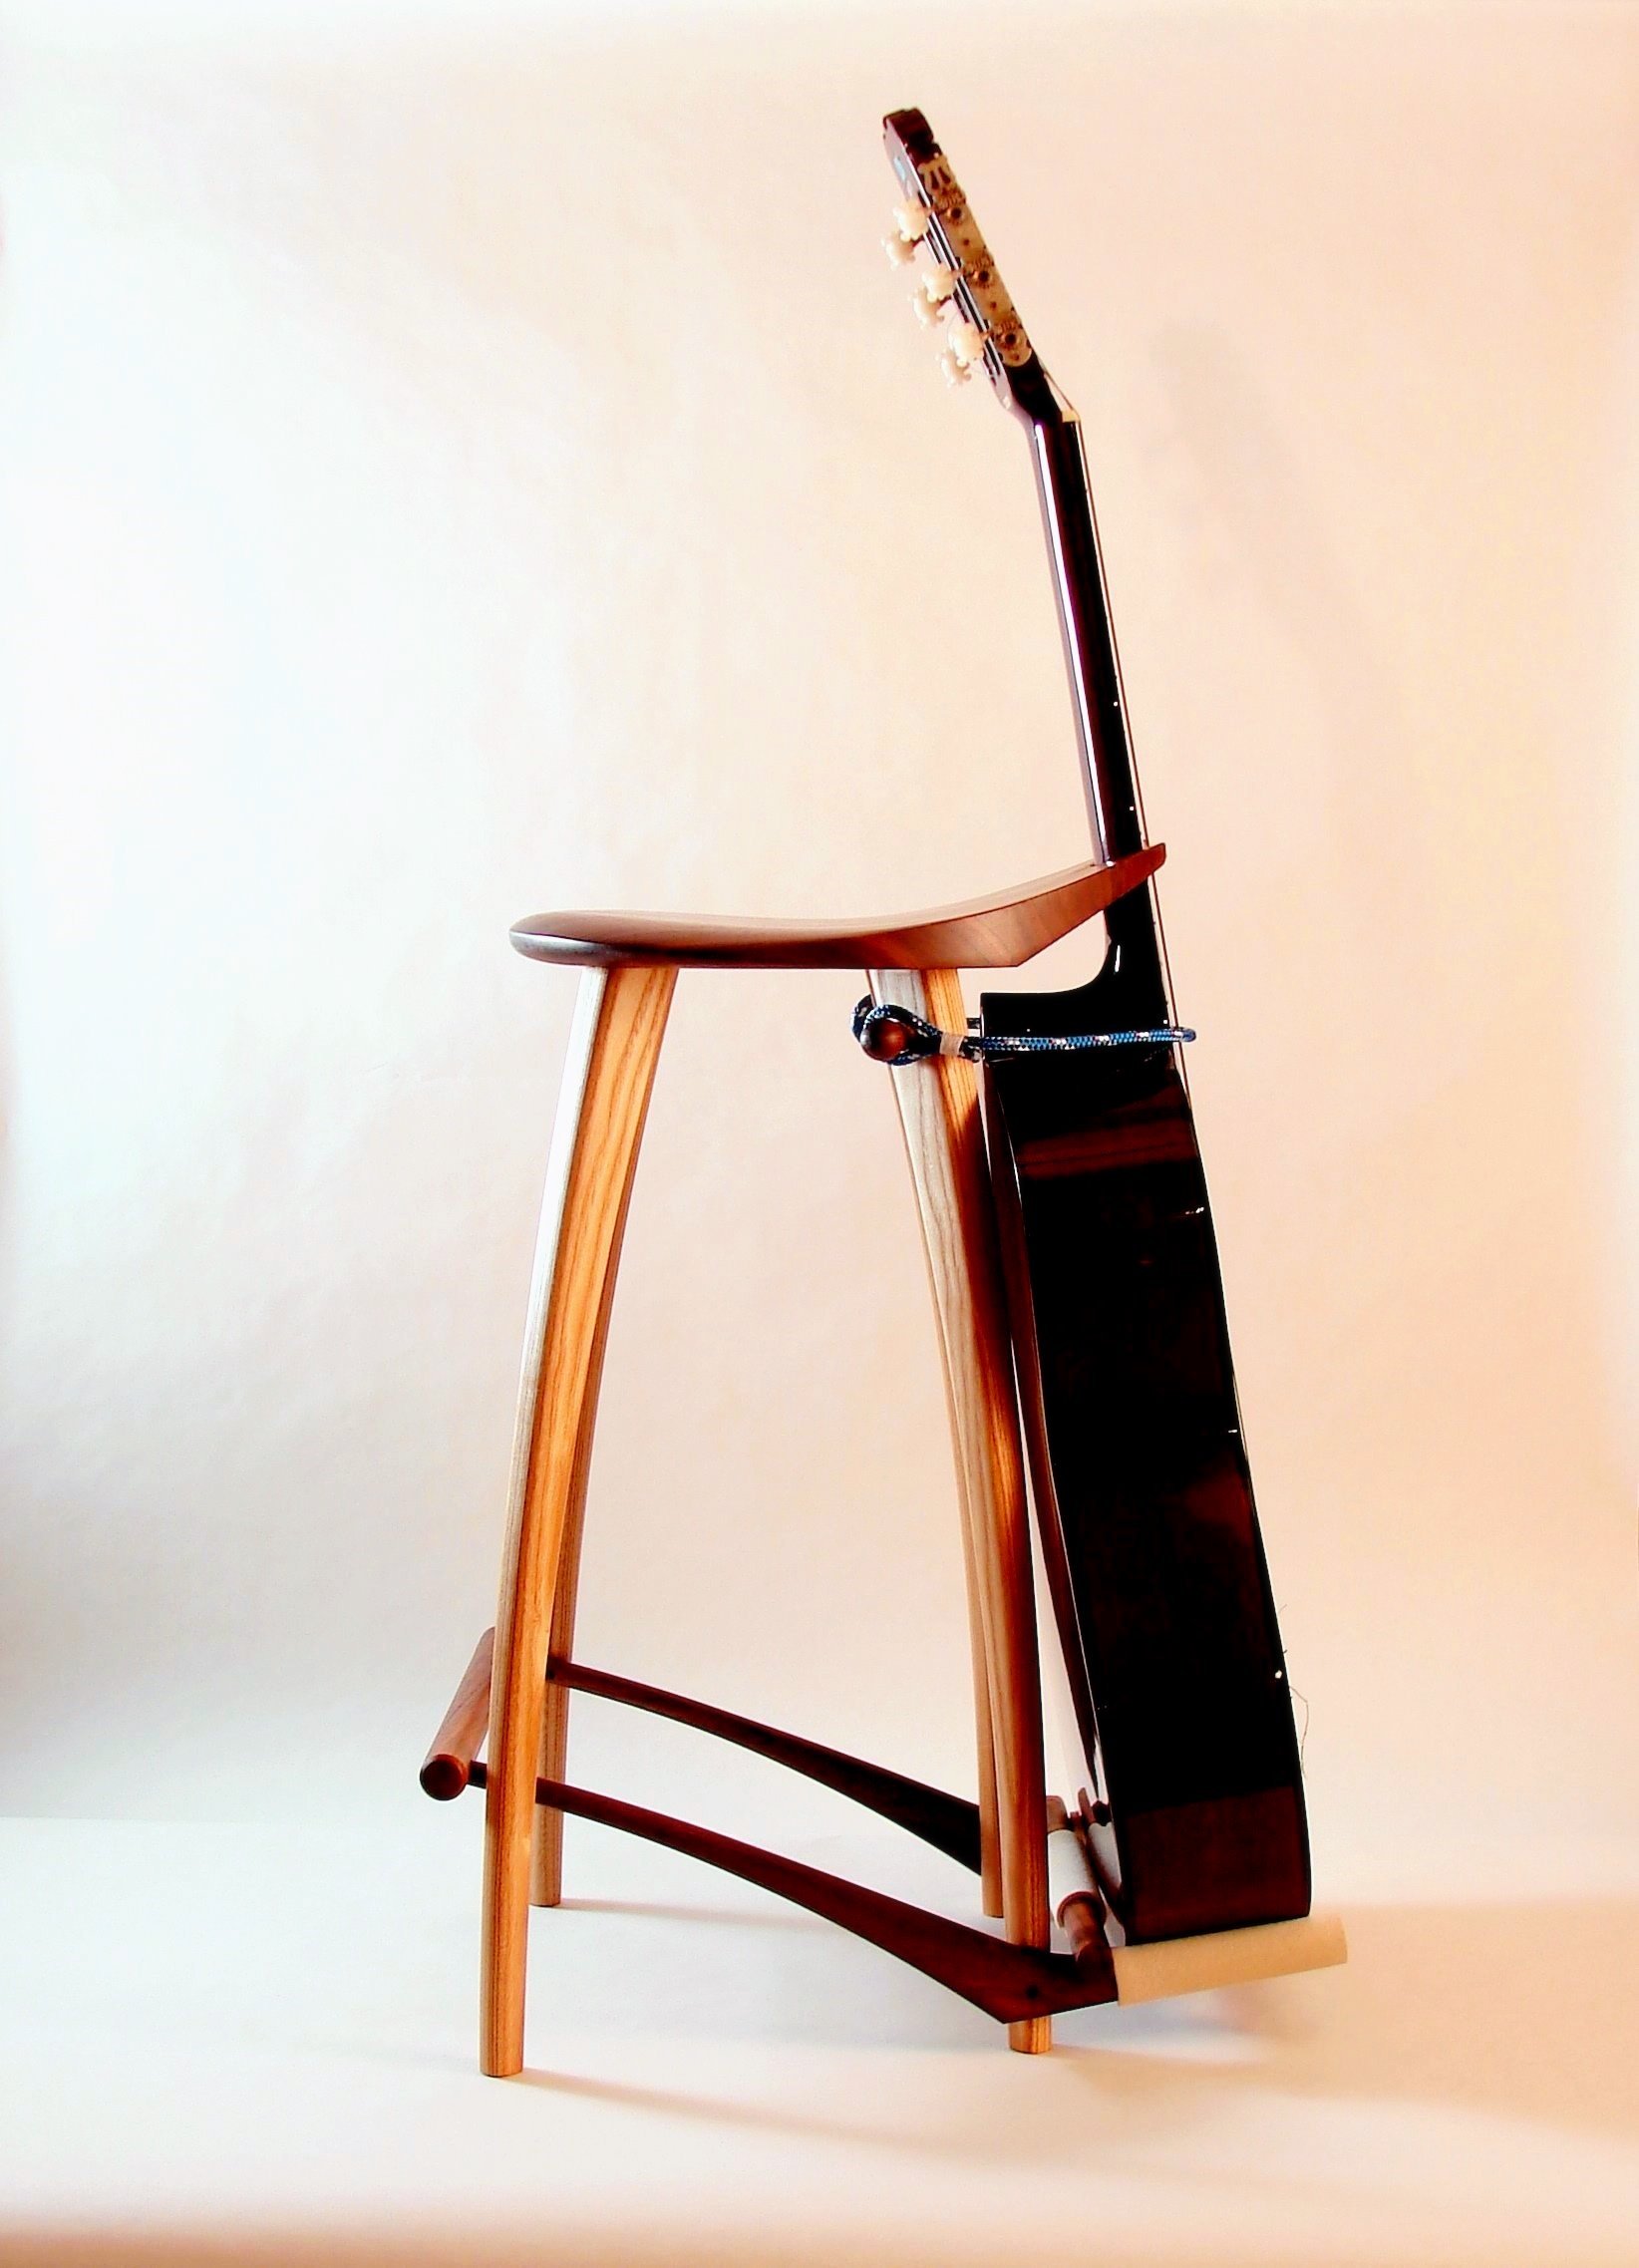 Diy Wooden Multiple Guitar Stand | Mary Stanley Blog